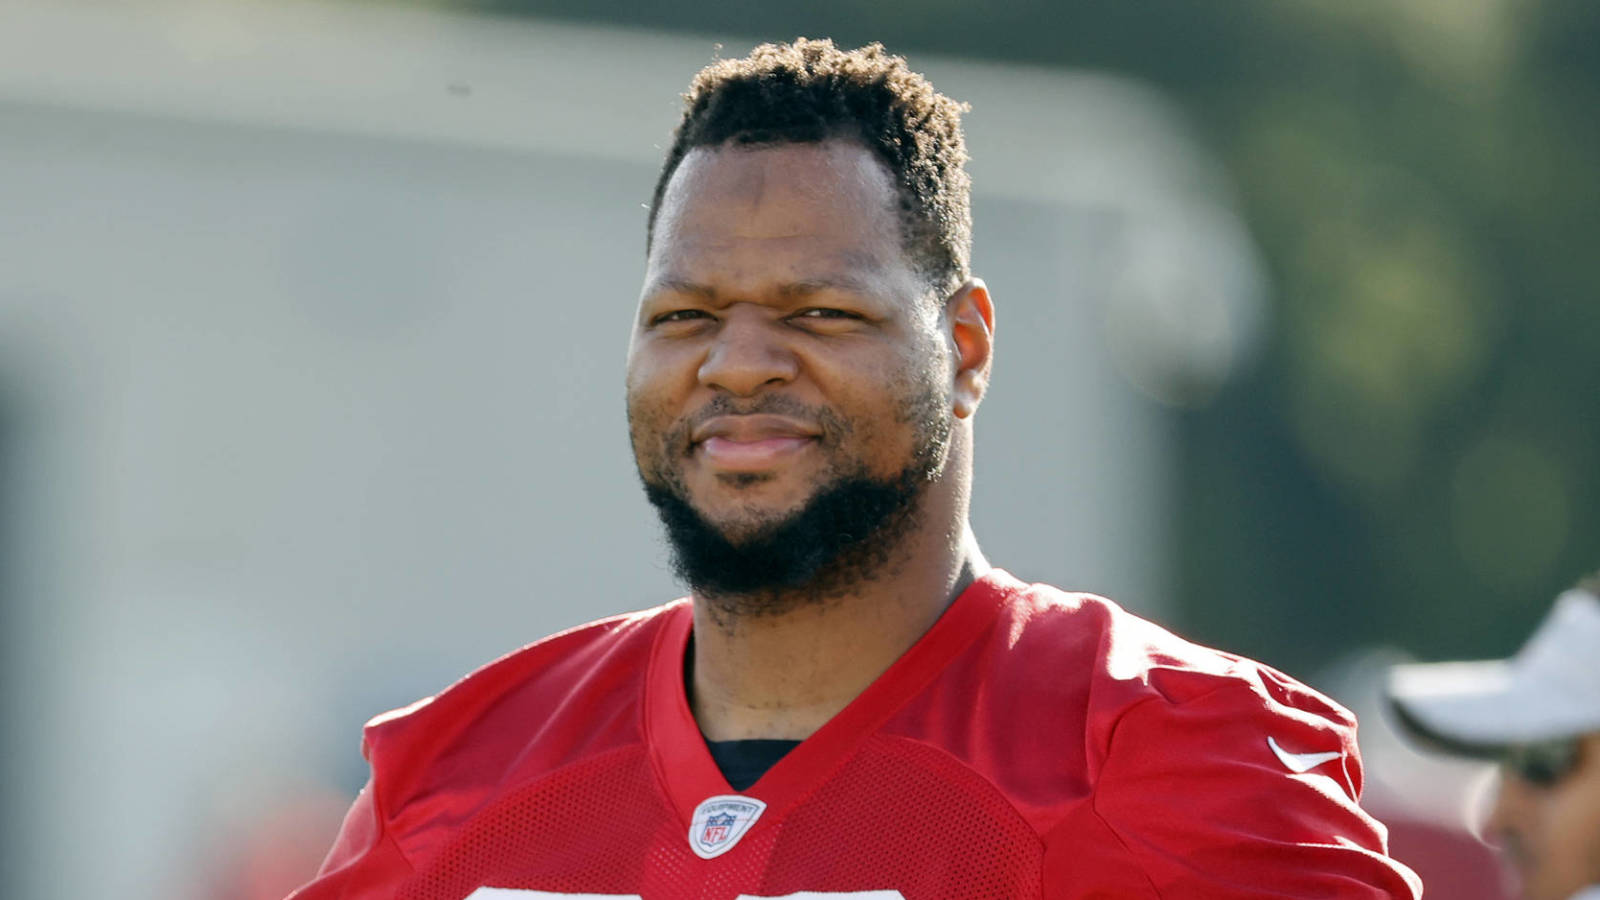 Buccaneers DL Ndamukong Suh added to reserve/COVID-19 list